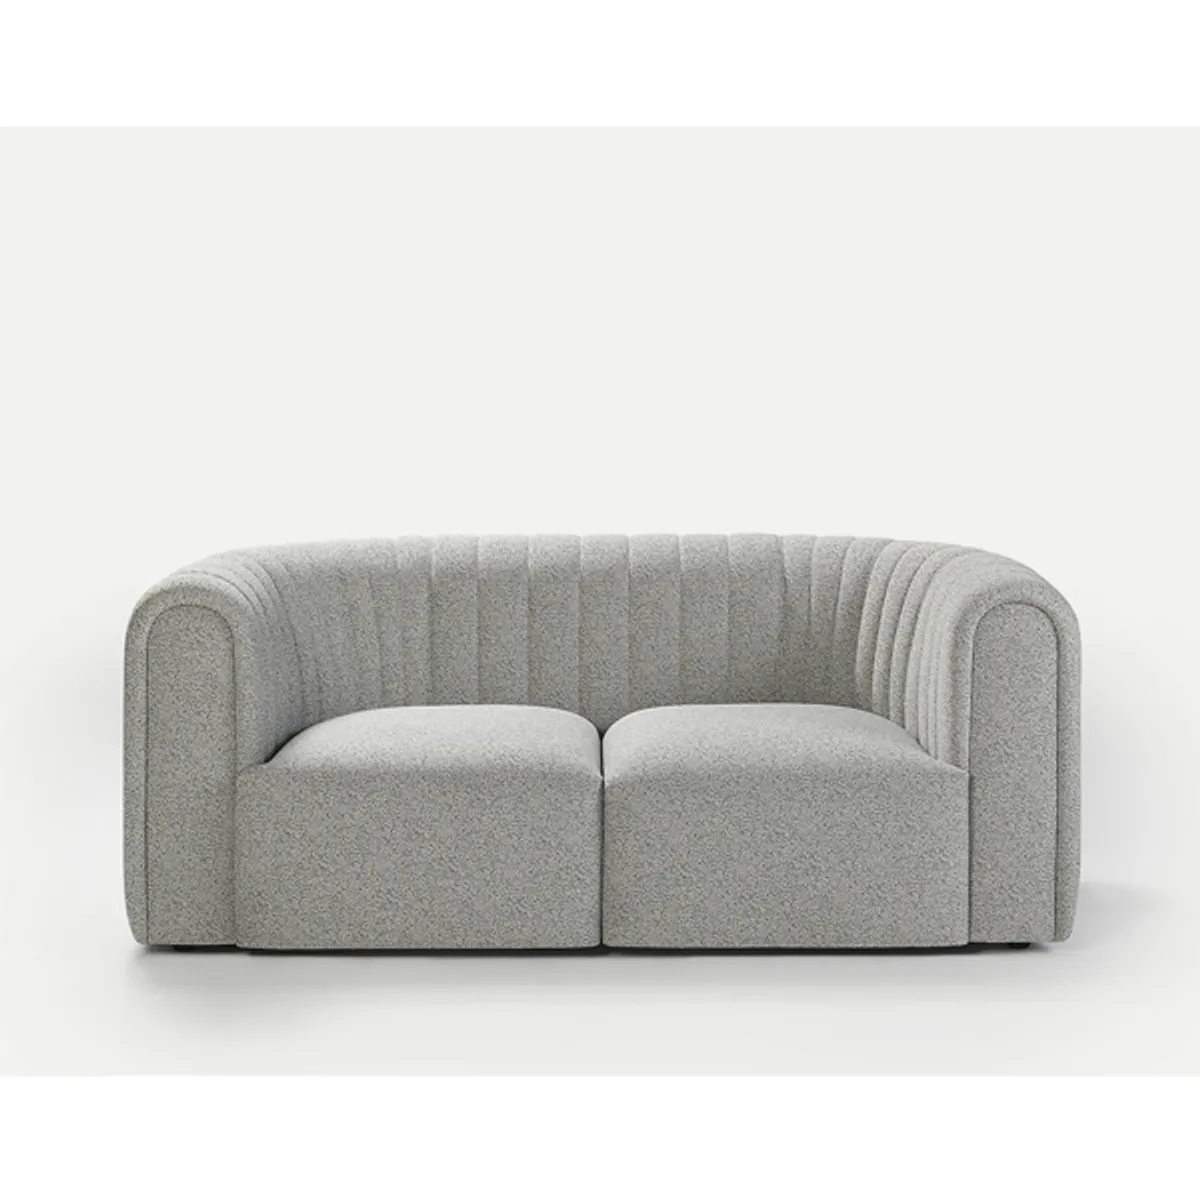 Core small sofa Inside Out Contracts3